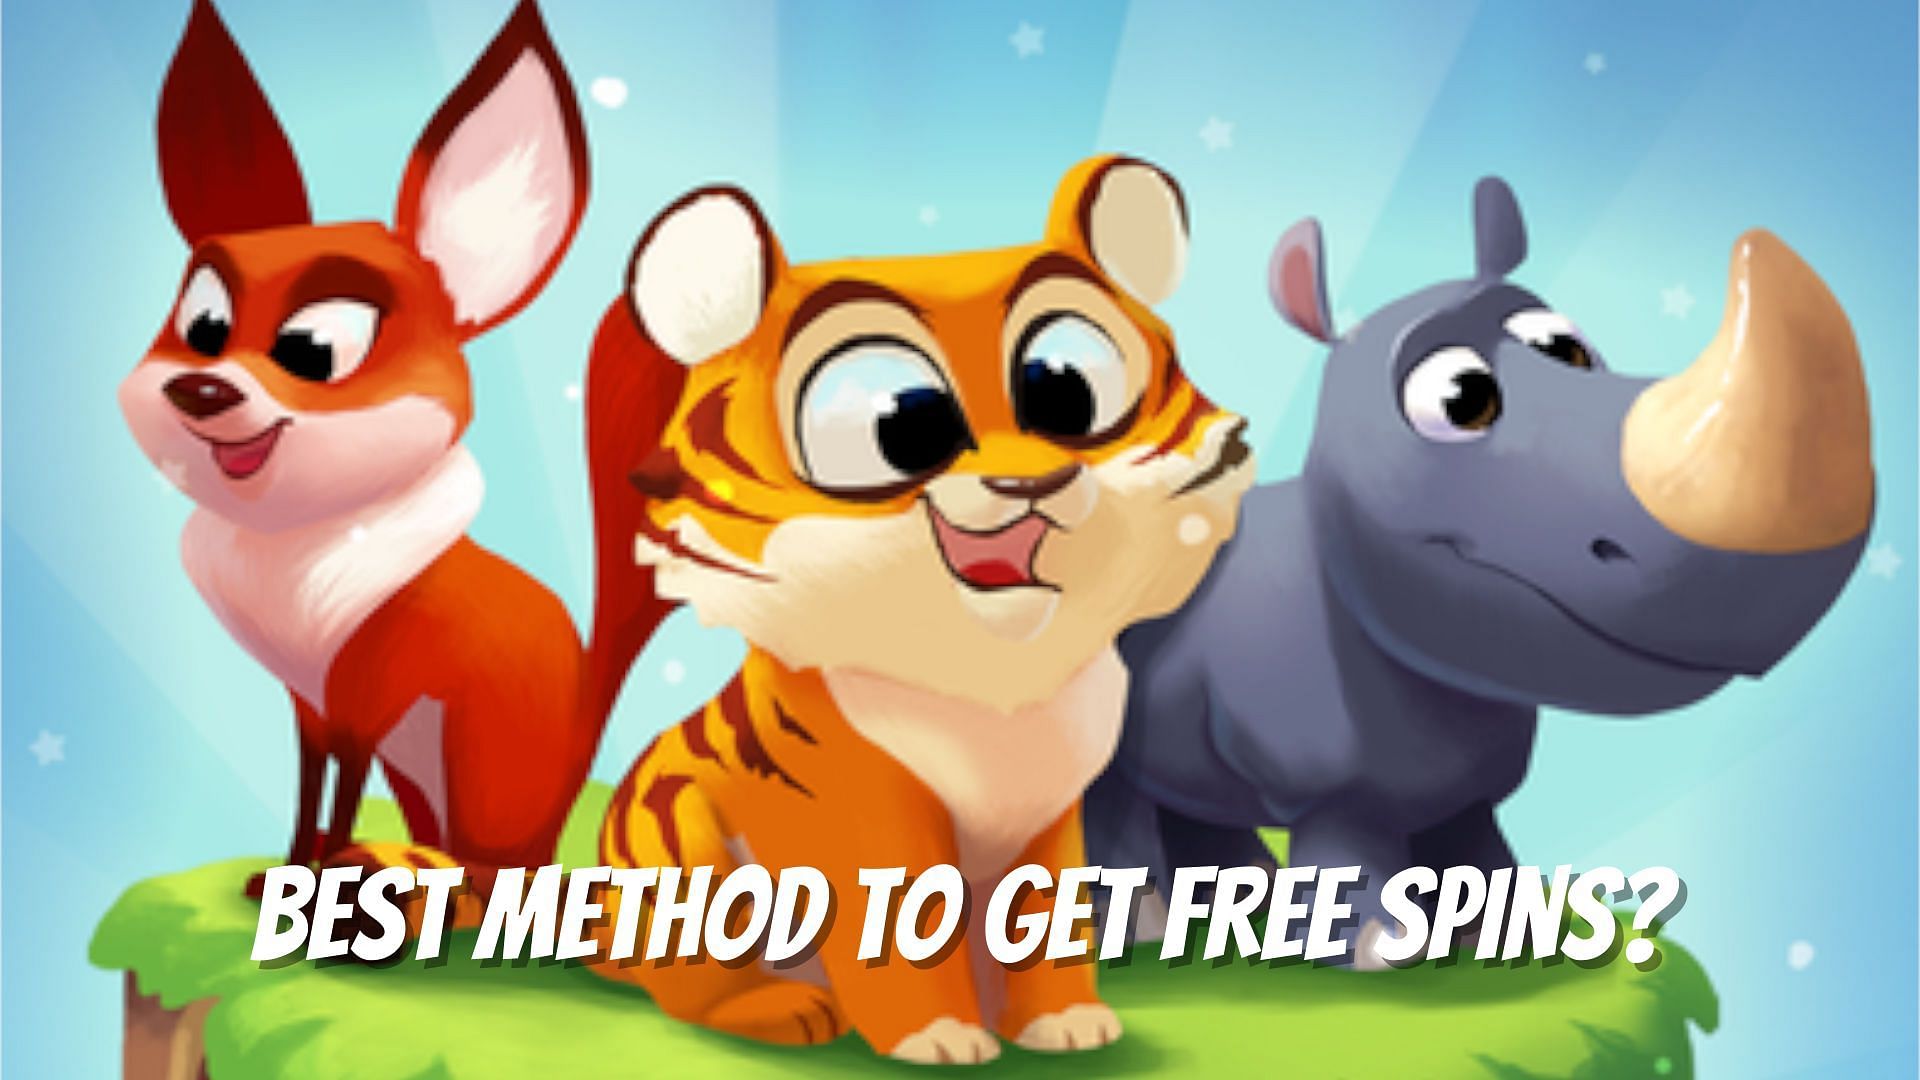 There are many methods, both legal and illegal, to obtain free spins. (Image via Sportskeeda)